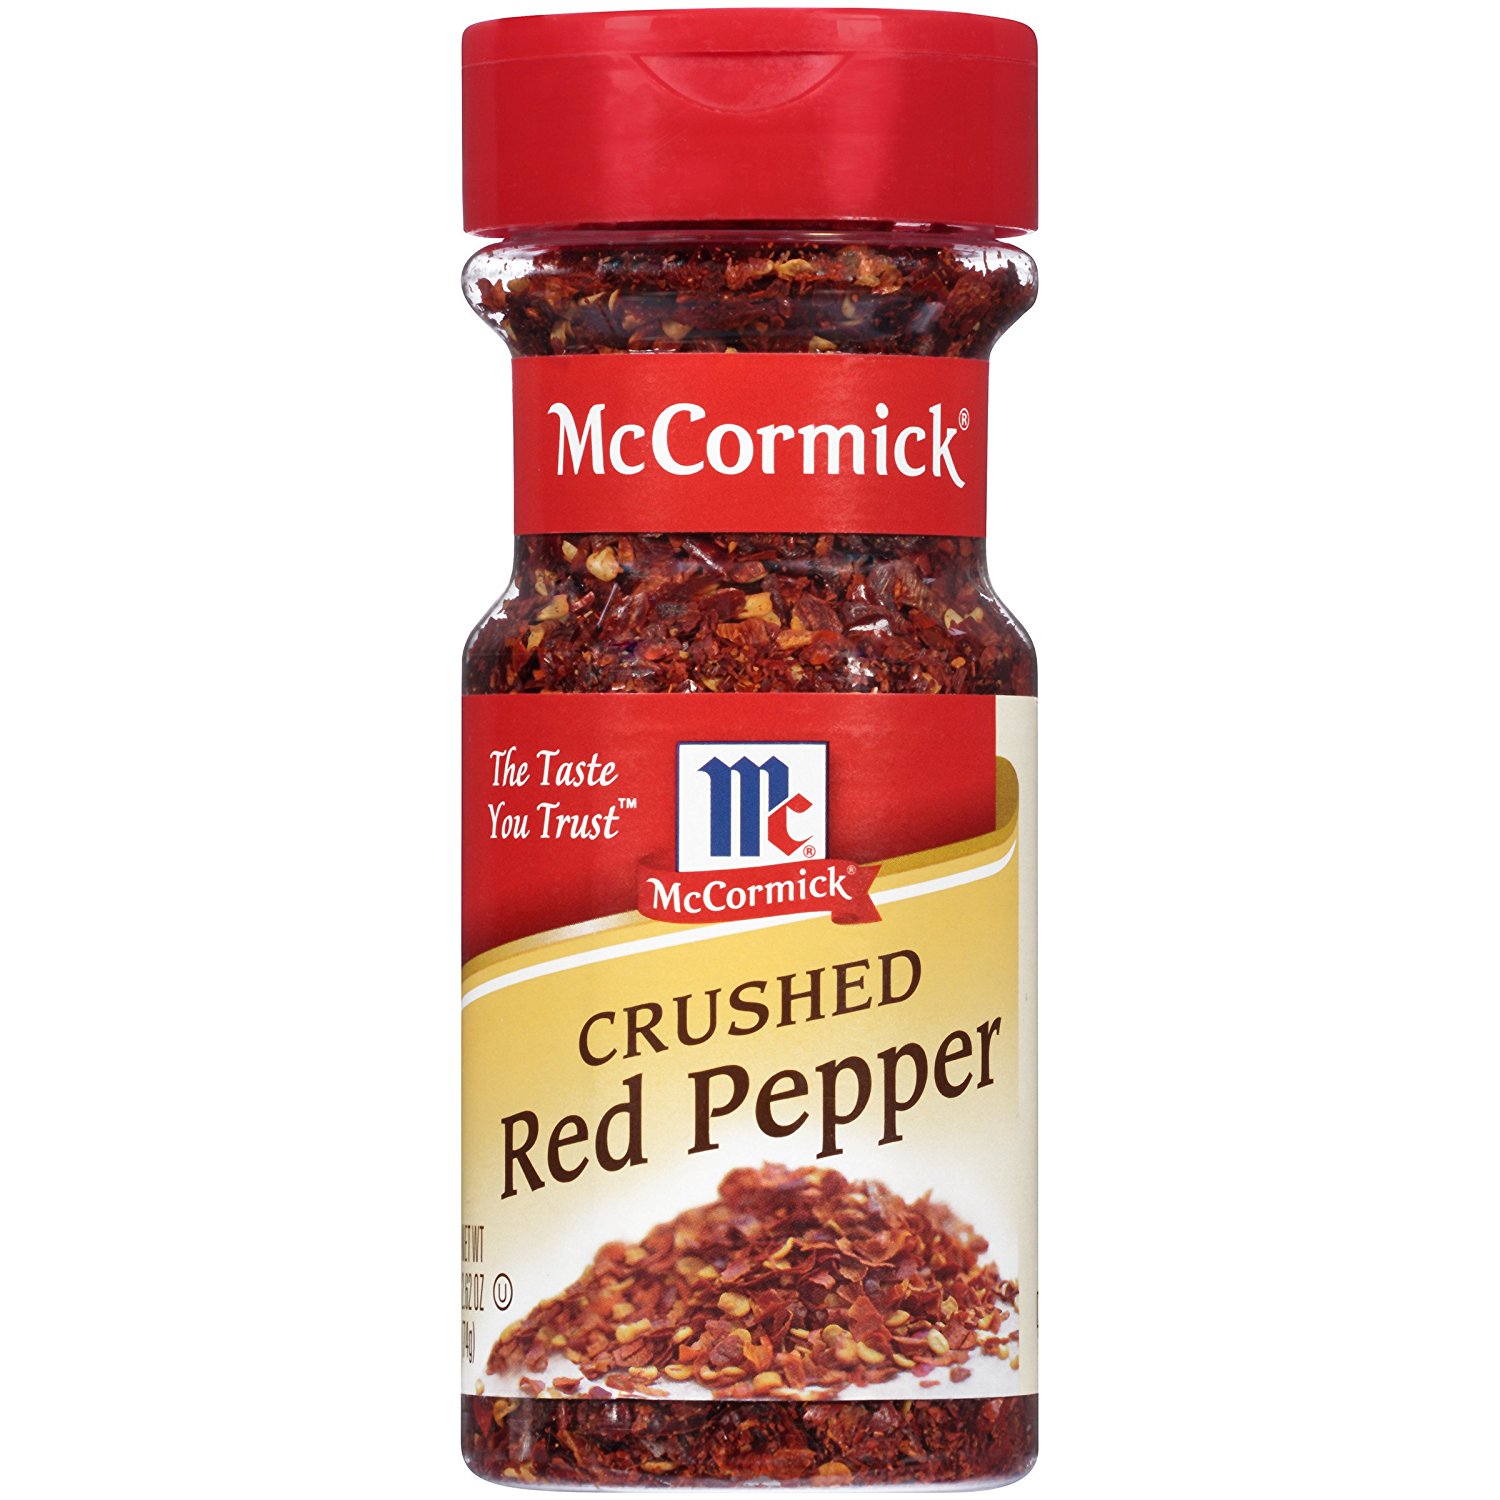 Amazon.com : McCormick Crushed Red Pepper, 2.62 oz : Grocery ...